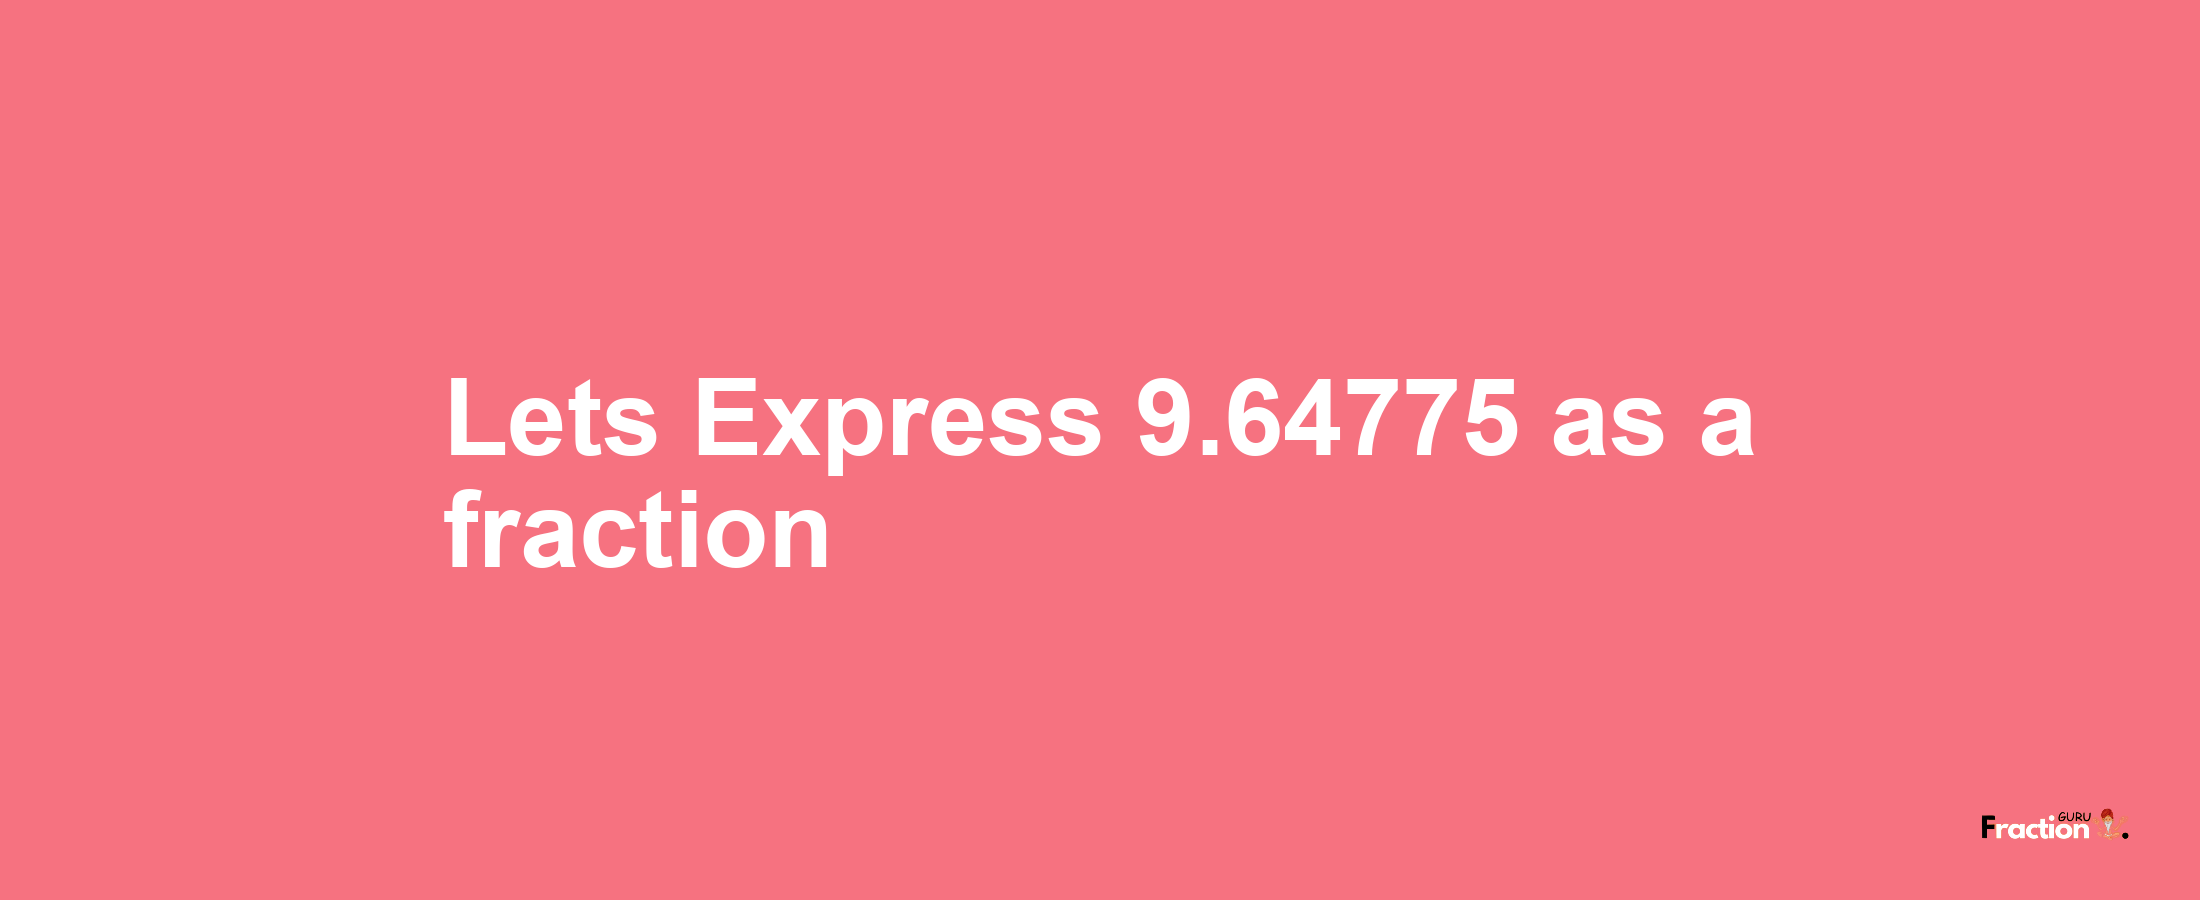 Lets Express 9.64775 as afraction